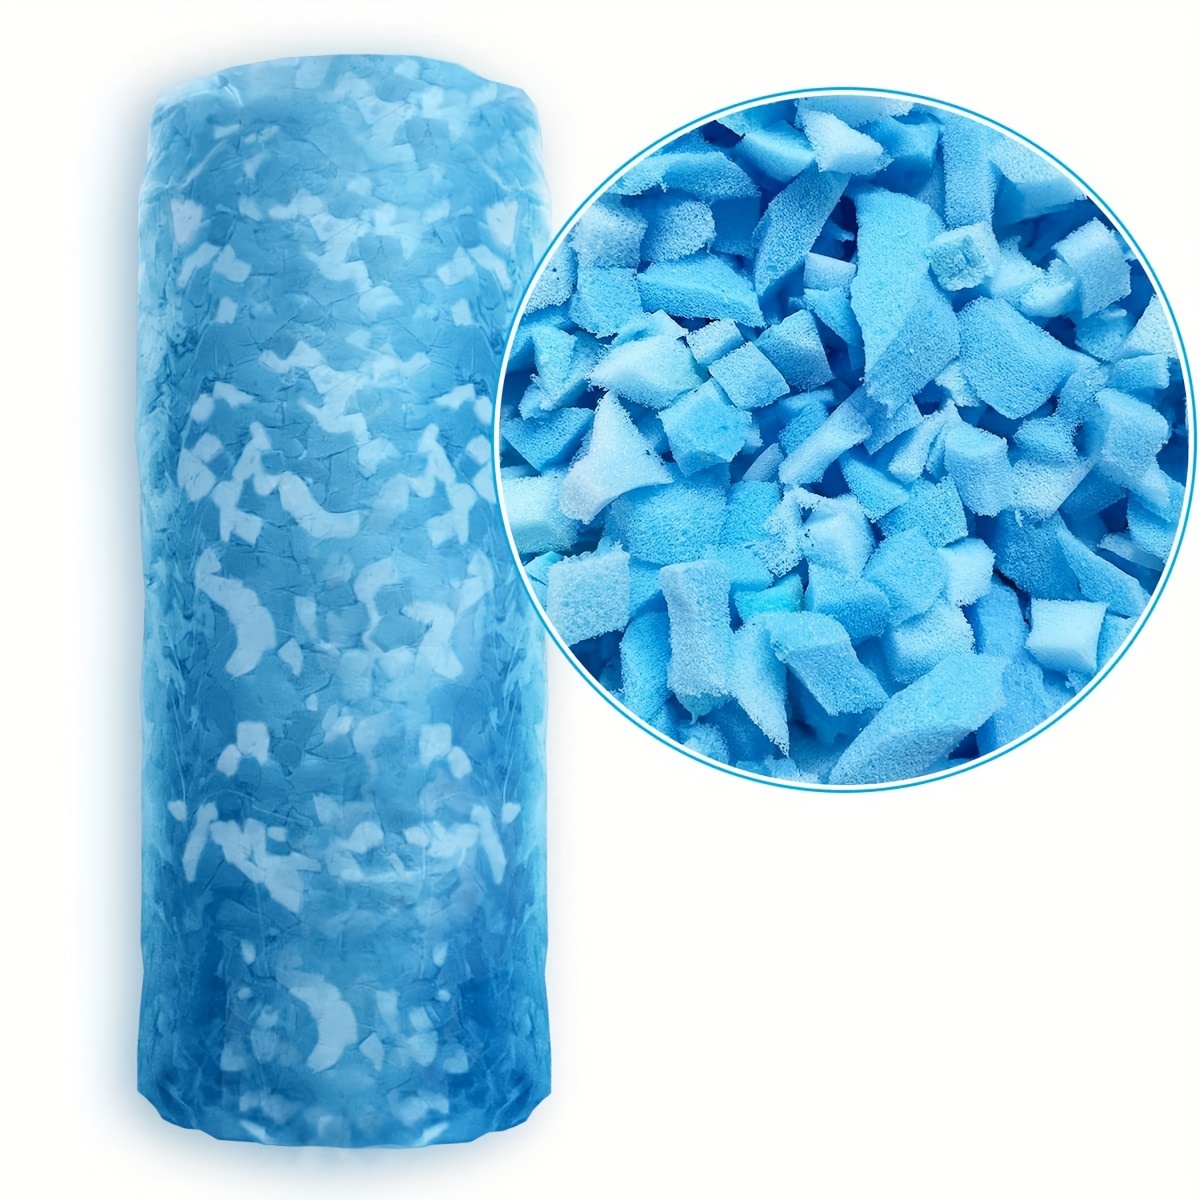 100g/3.53oz Blue White Yellow Fill Material,Shredded Memory Foam Filling,For  Pillows, Bean Bag Chairs, Stuffed Toys, Lazy Sofas, Christmas Animals, And  Craft Filling Substitute